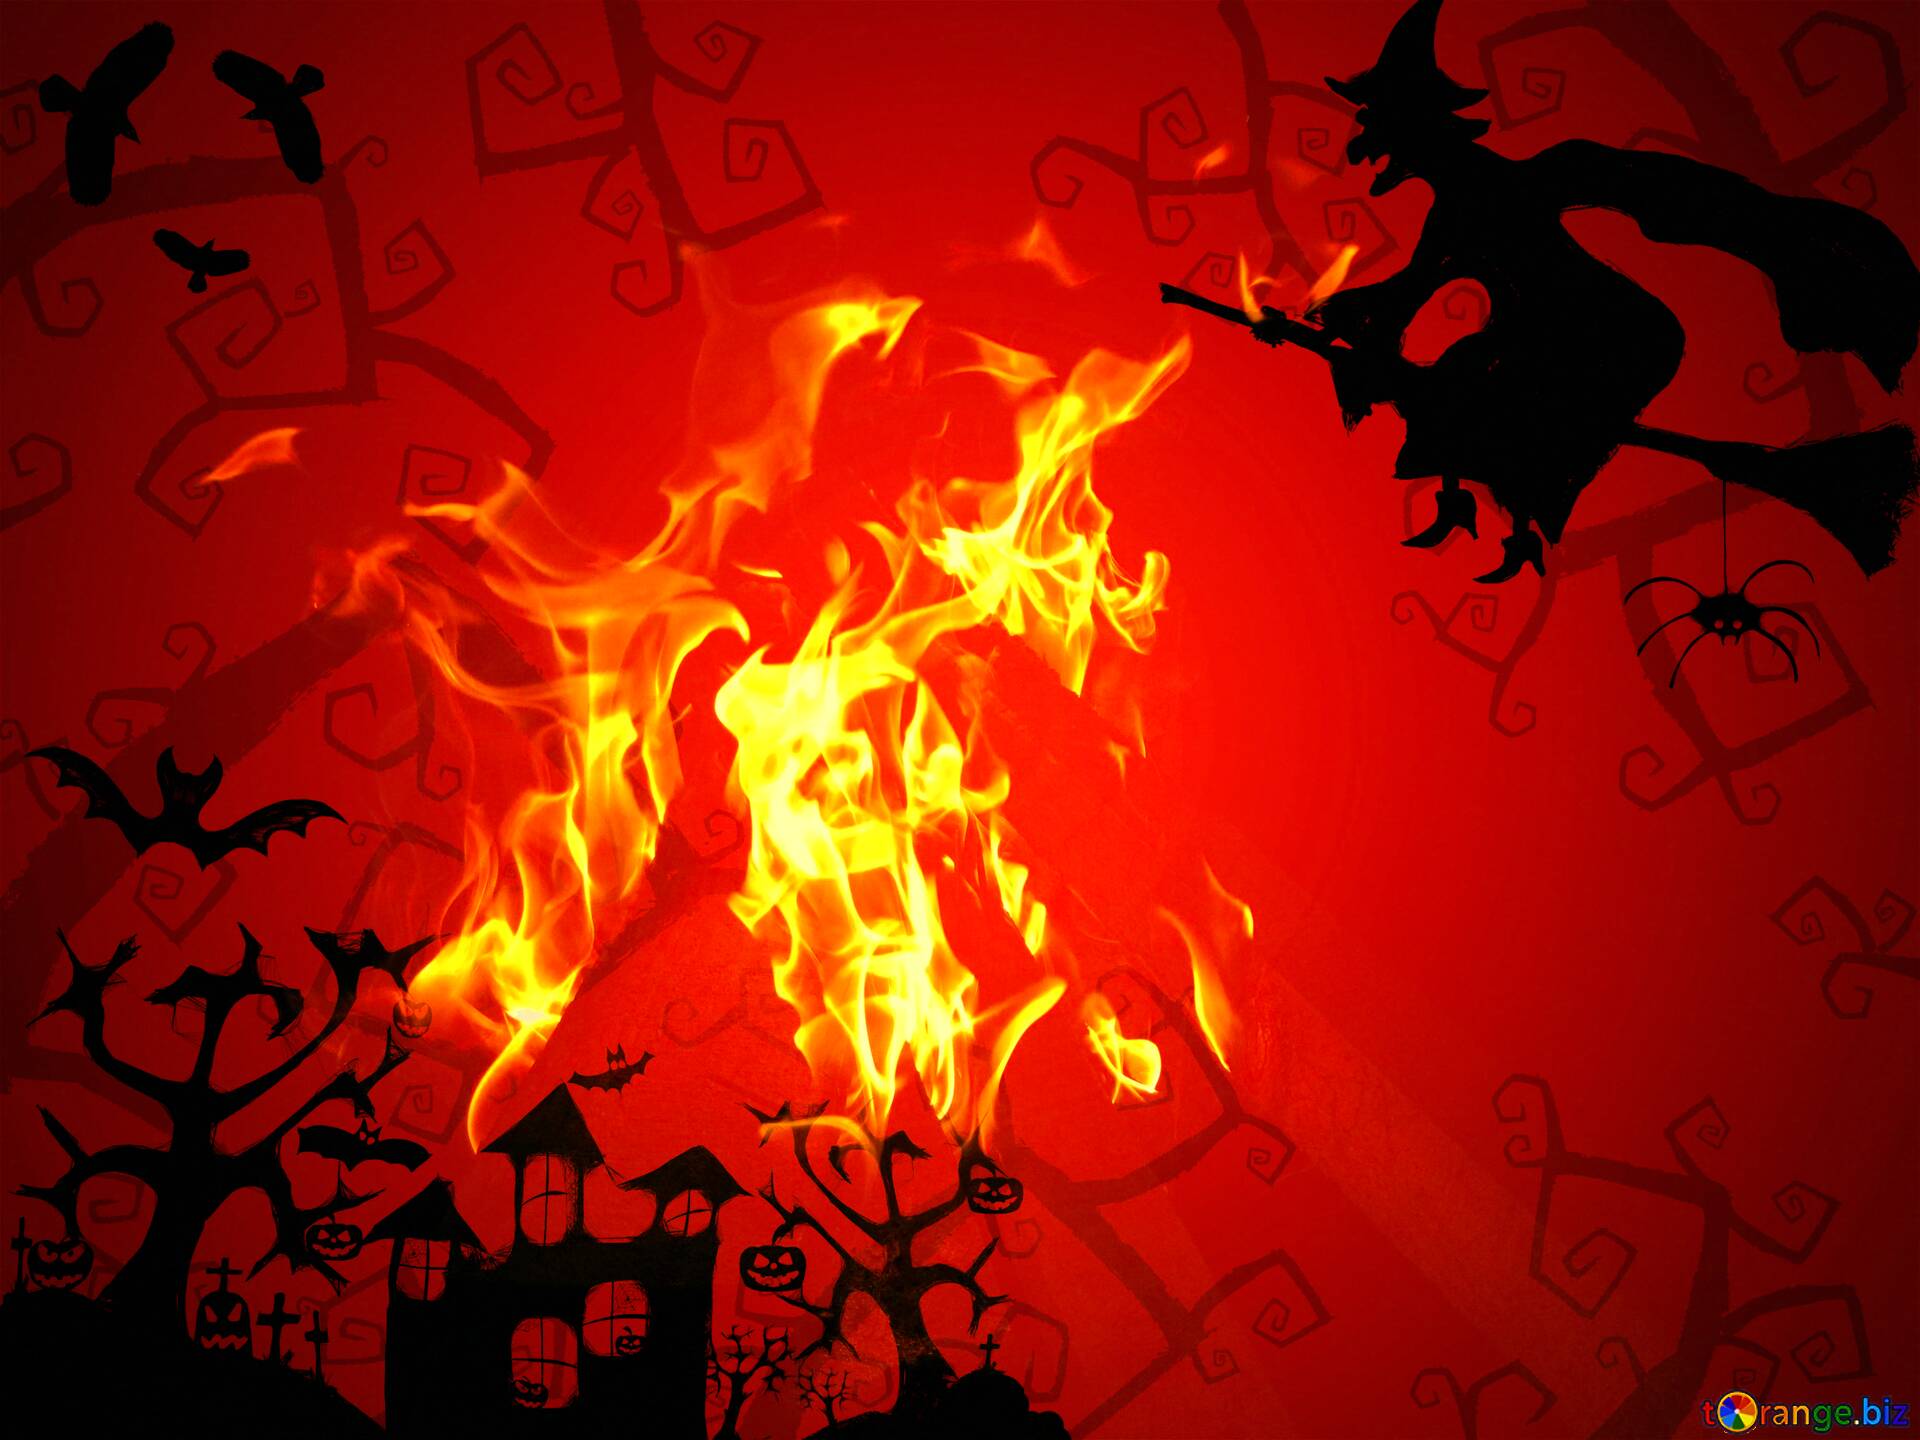 Download Free Picture Halloween Fire Background On Cc By License Free Image Stock Torange Biz Fx 210050